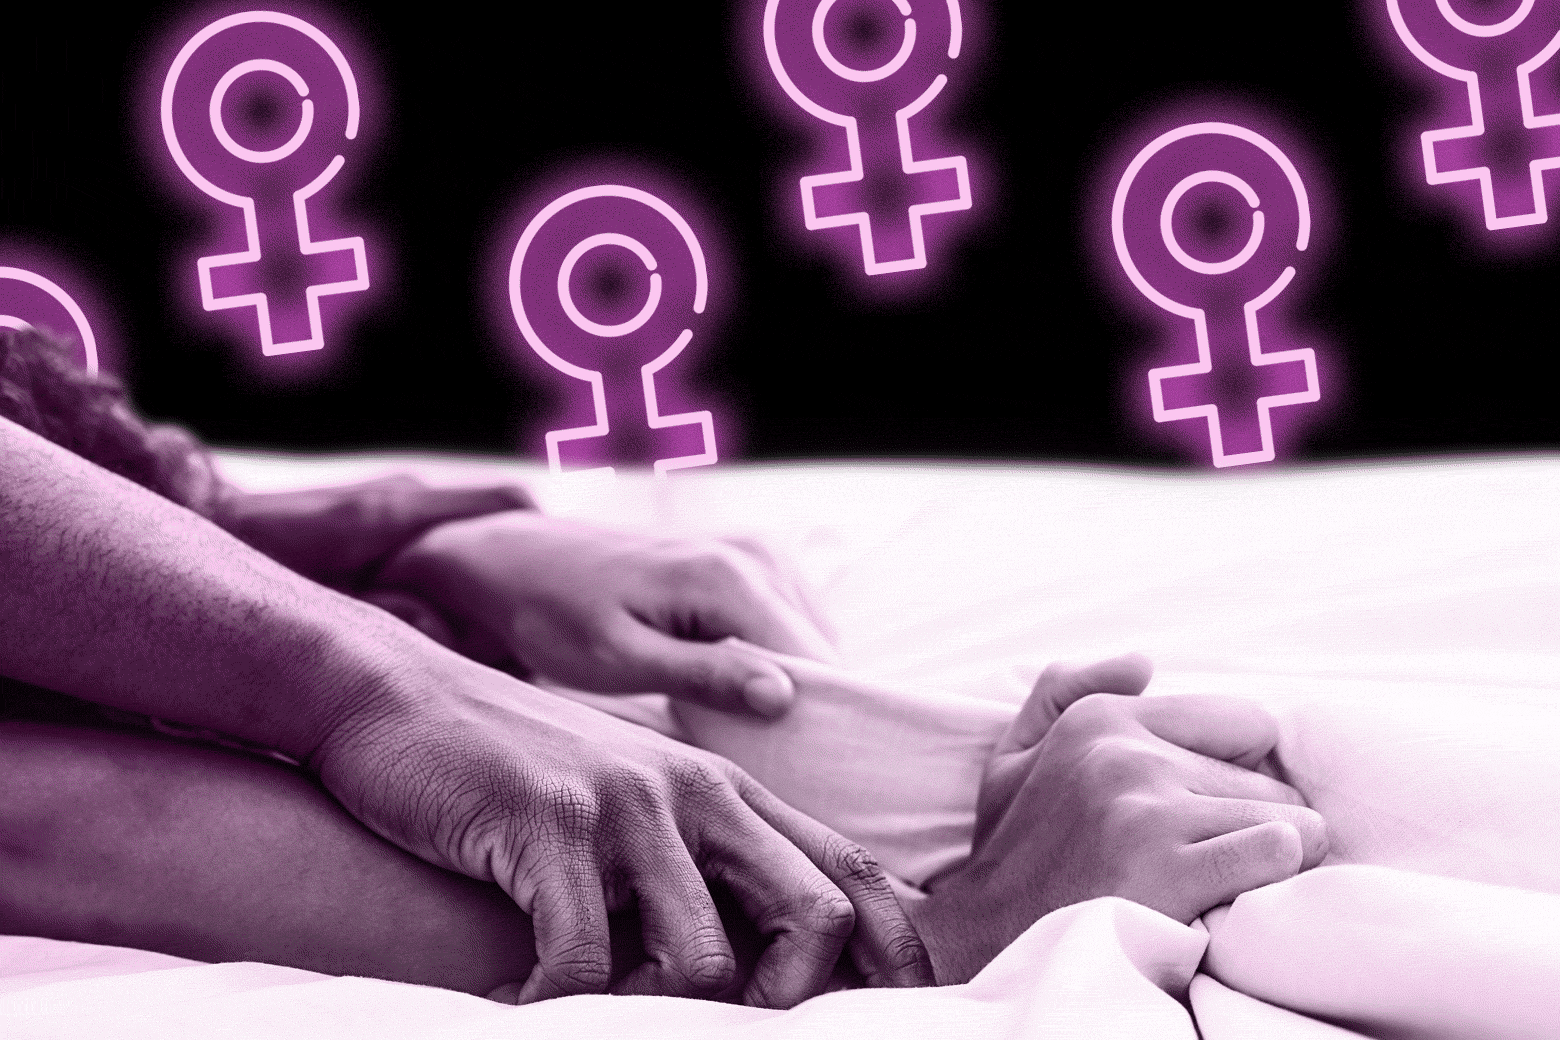 A man holds down a woman's wrists in bed with female symbols in the background in neon.